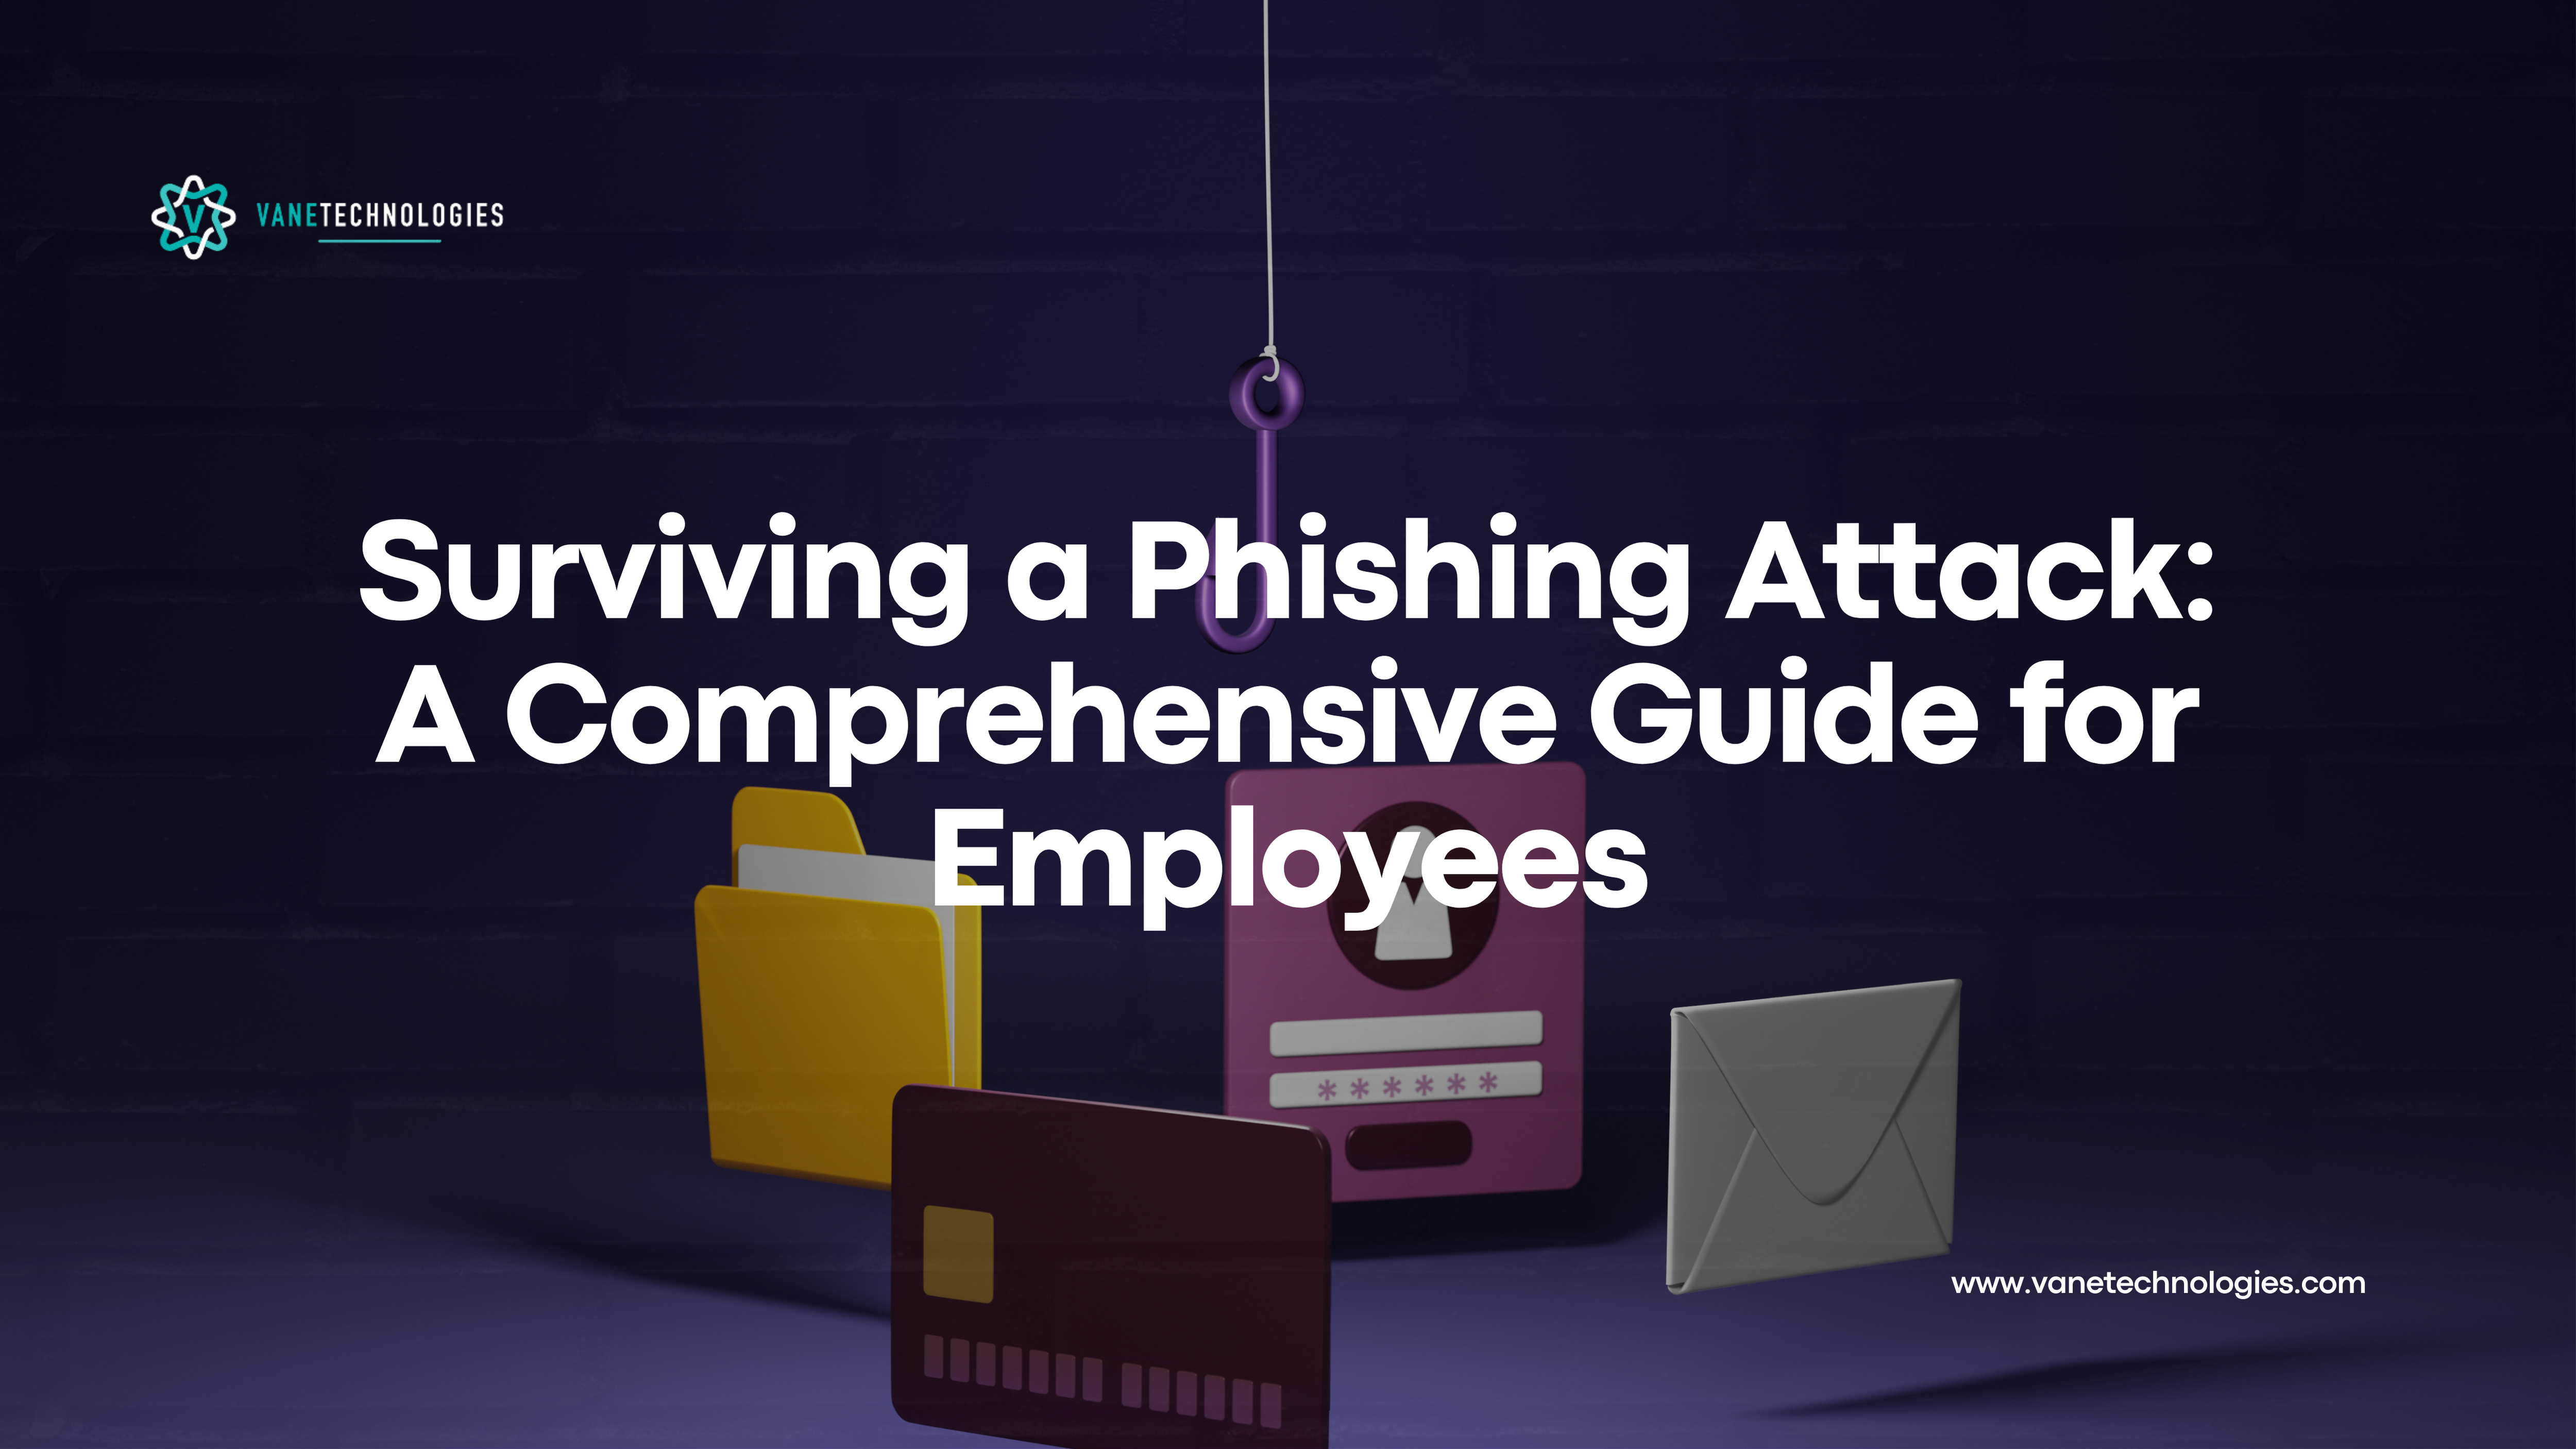 Surviving a Phishing Attack: A Comprehensive Guide for Employees